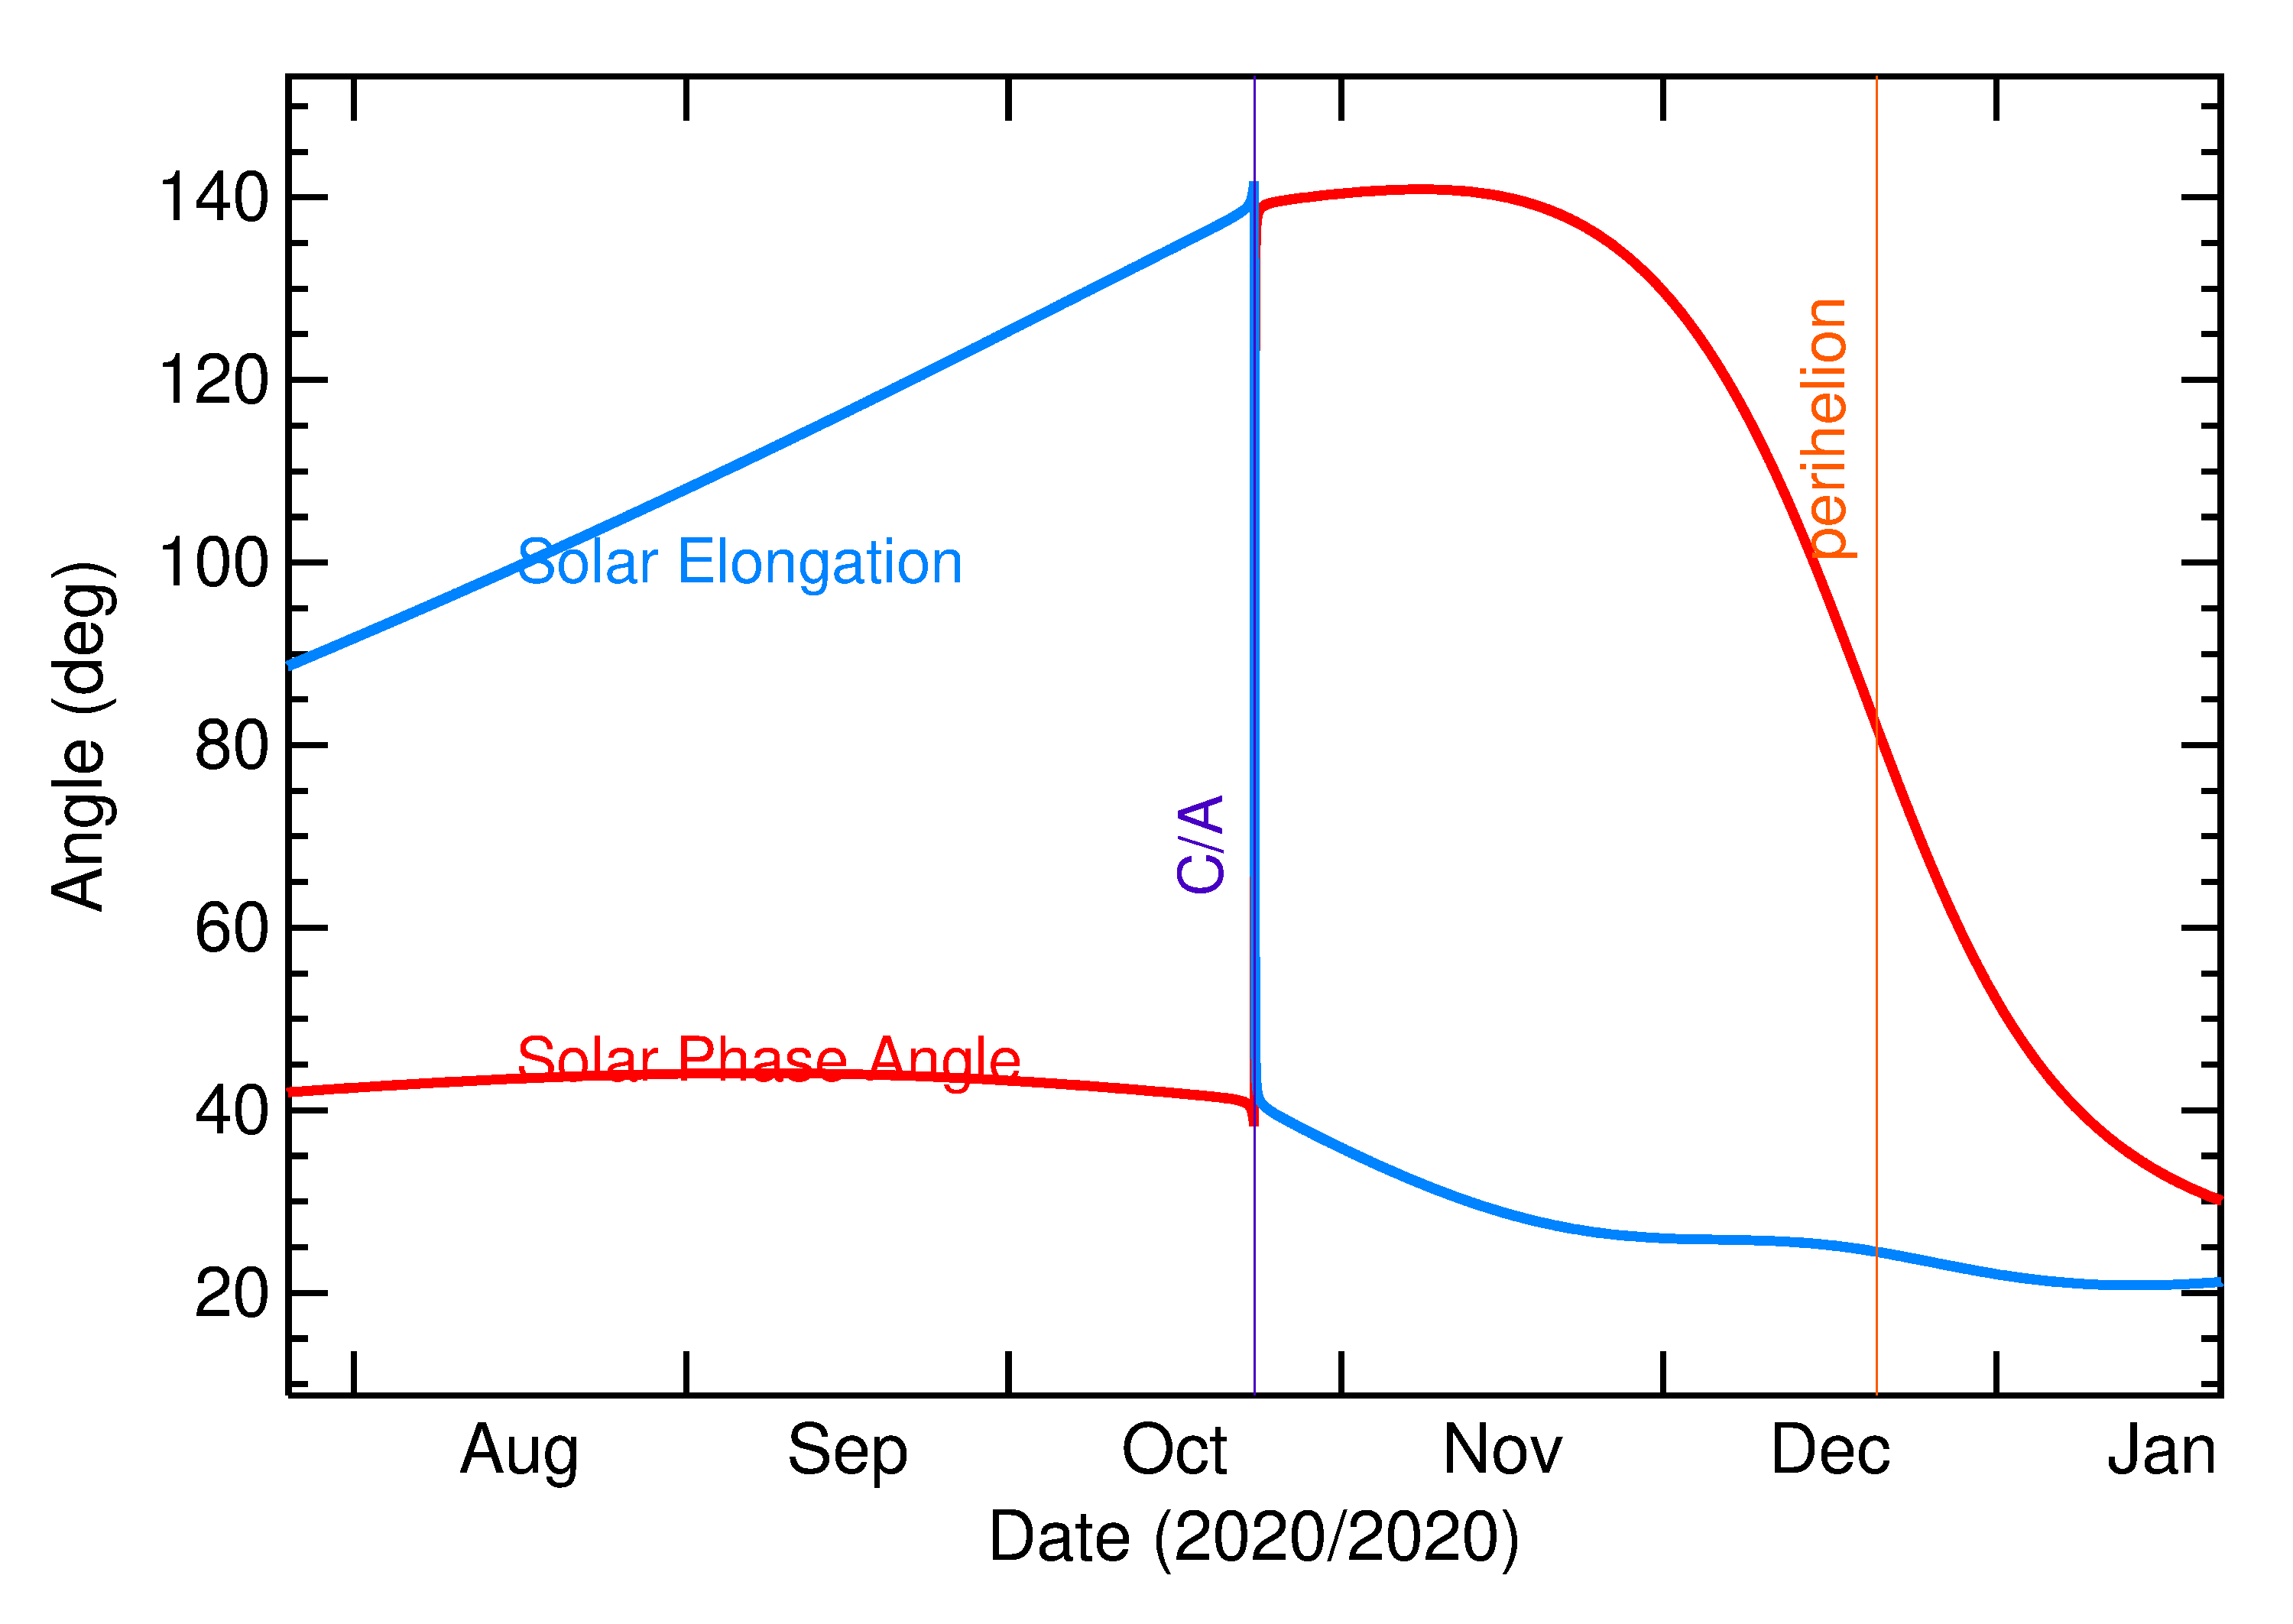 Solar Elongation and Solar Phase Angle of 2020 UF3 in the months around closest approach